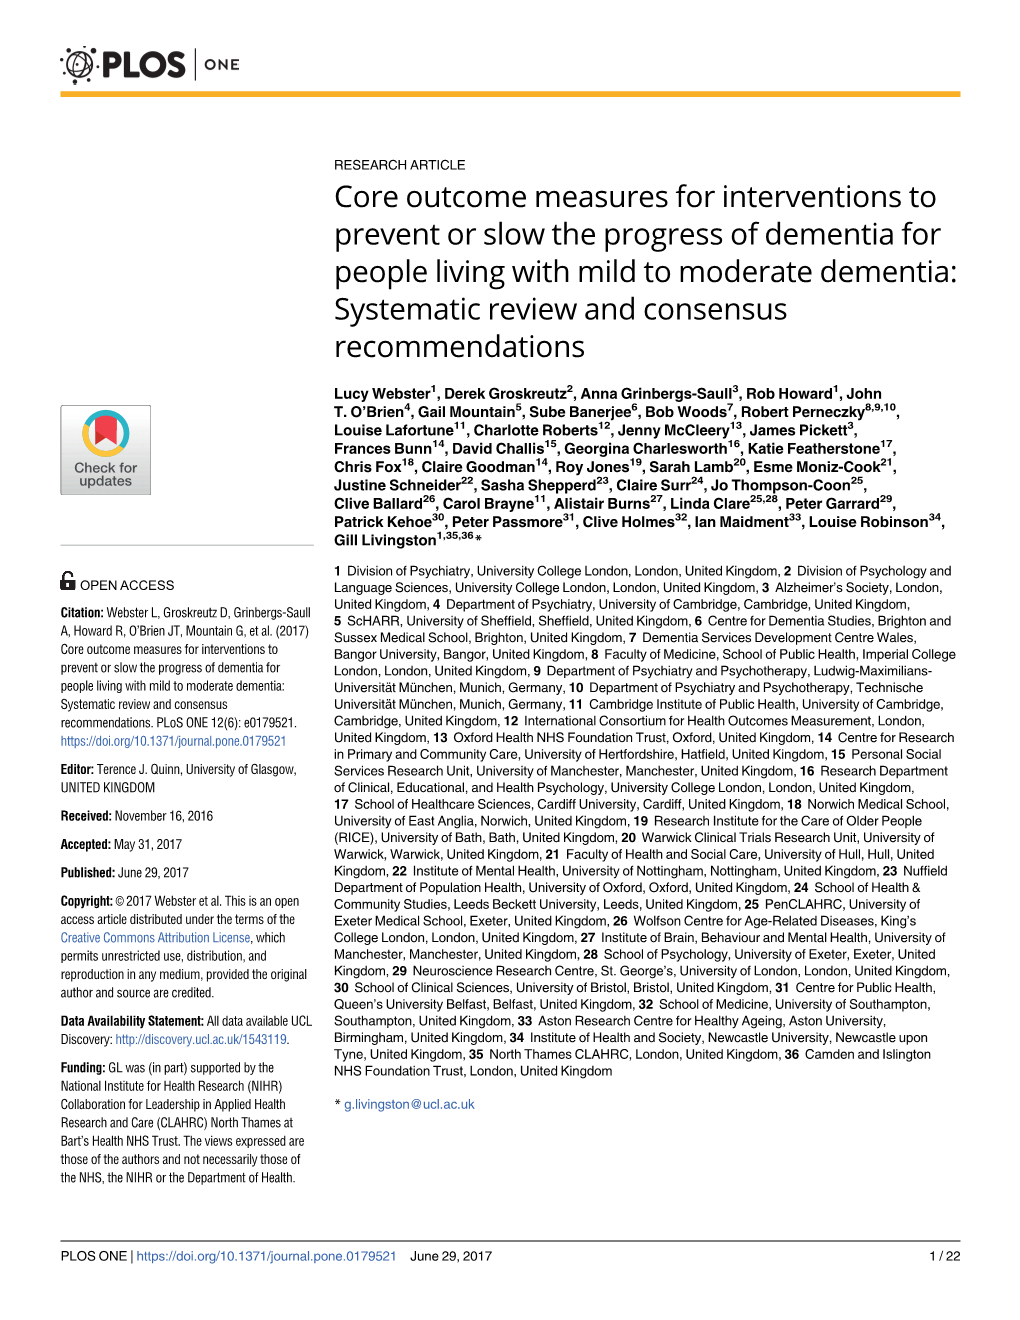 Core Outcome Measures for Interventions to Prevent Or Slow the Progress of Dementia for People Living with Mild to Moderate Deme